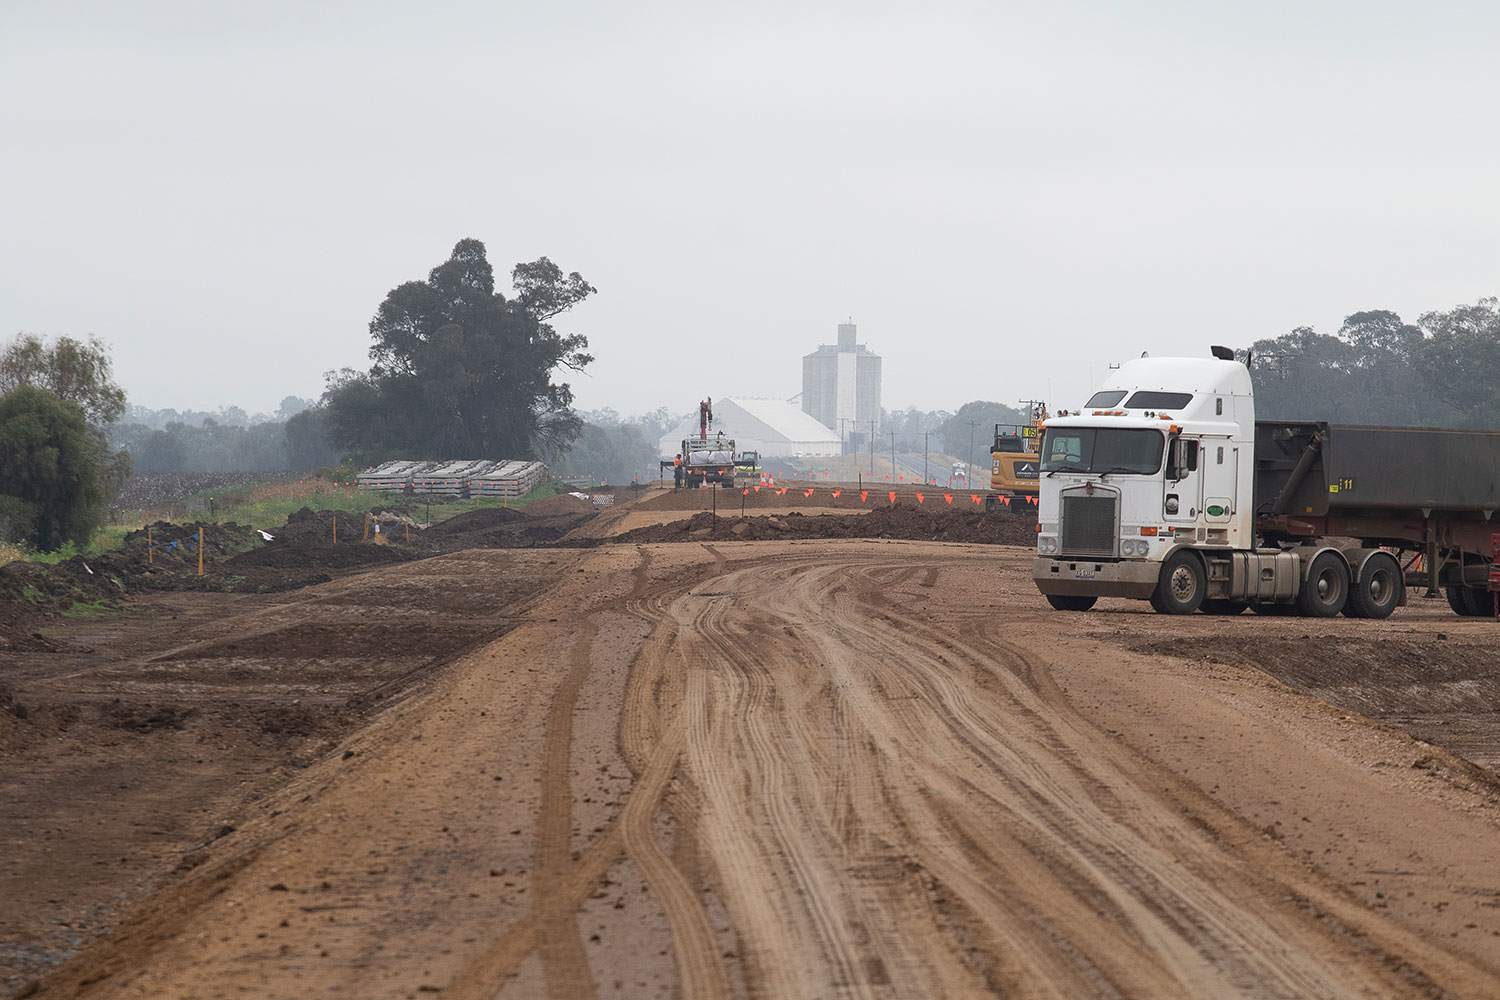 Installation of capping material north of Narrabri, with Edgeroi in the background